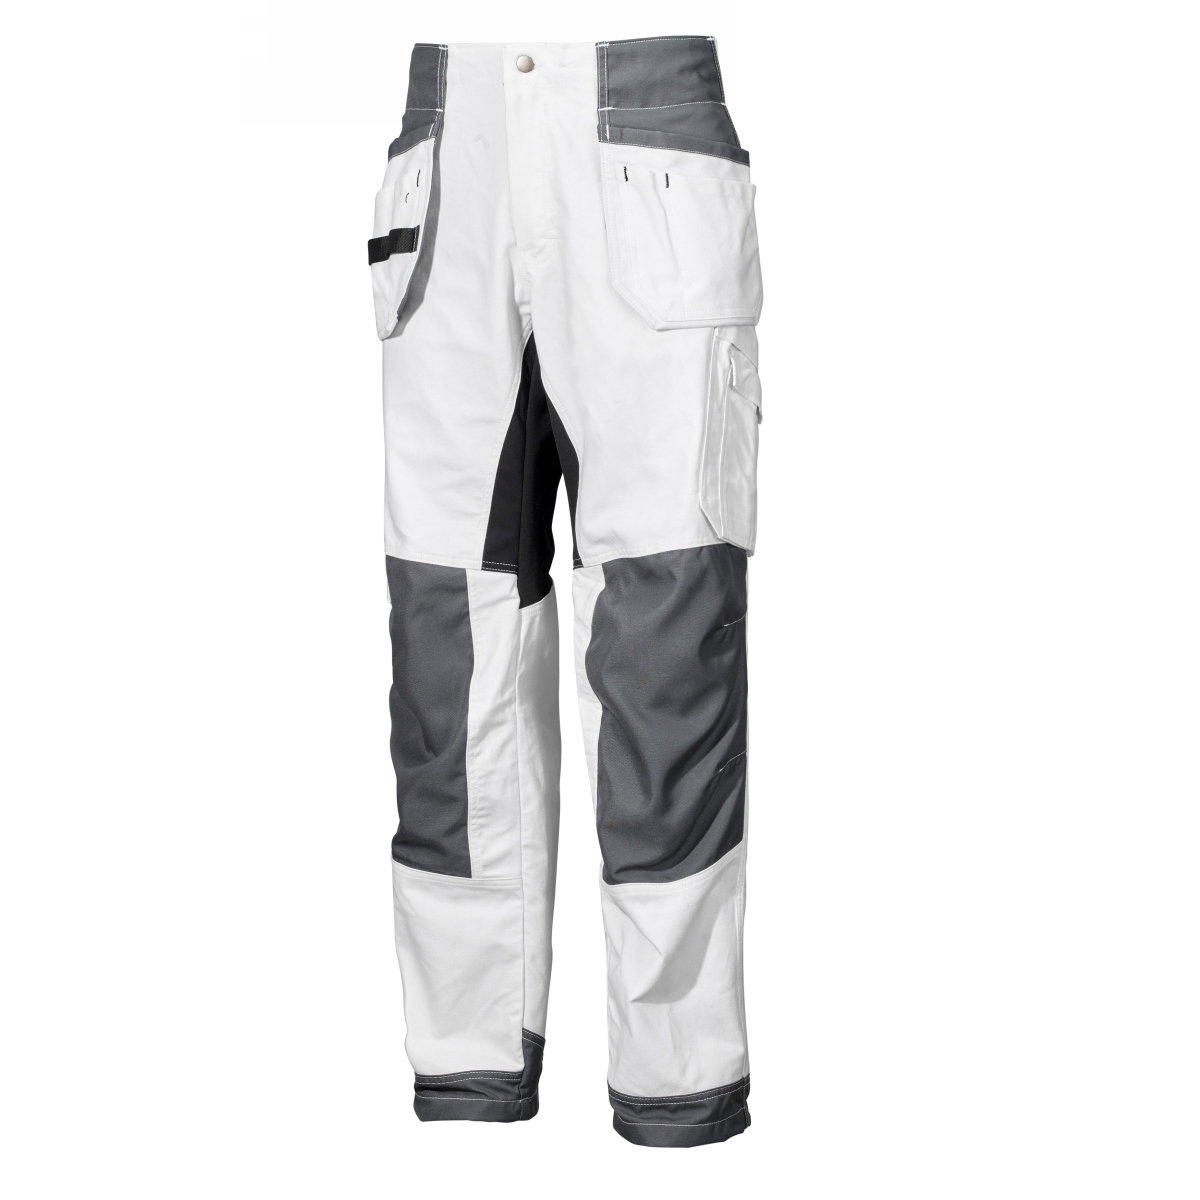 Painters Tool Pocket pants with Stretch - FaceLine Inc Store